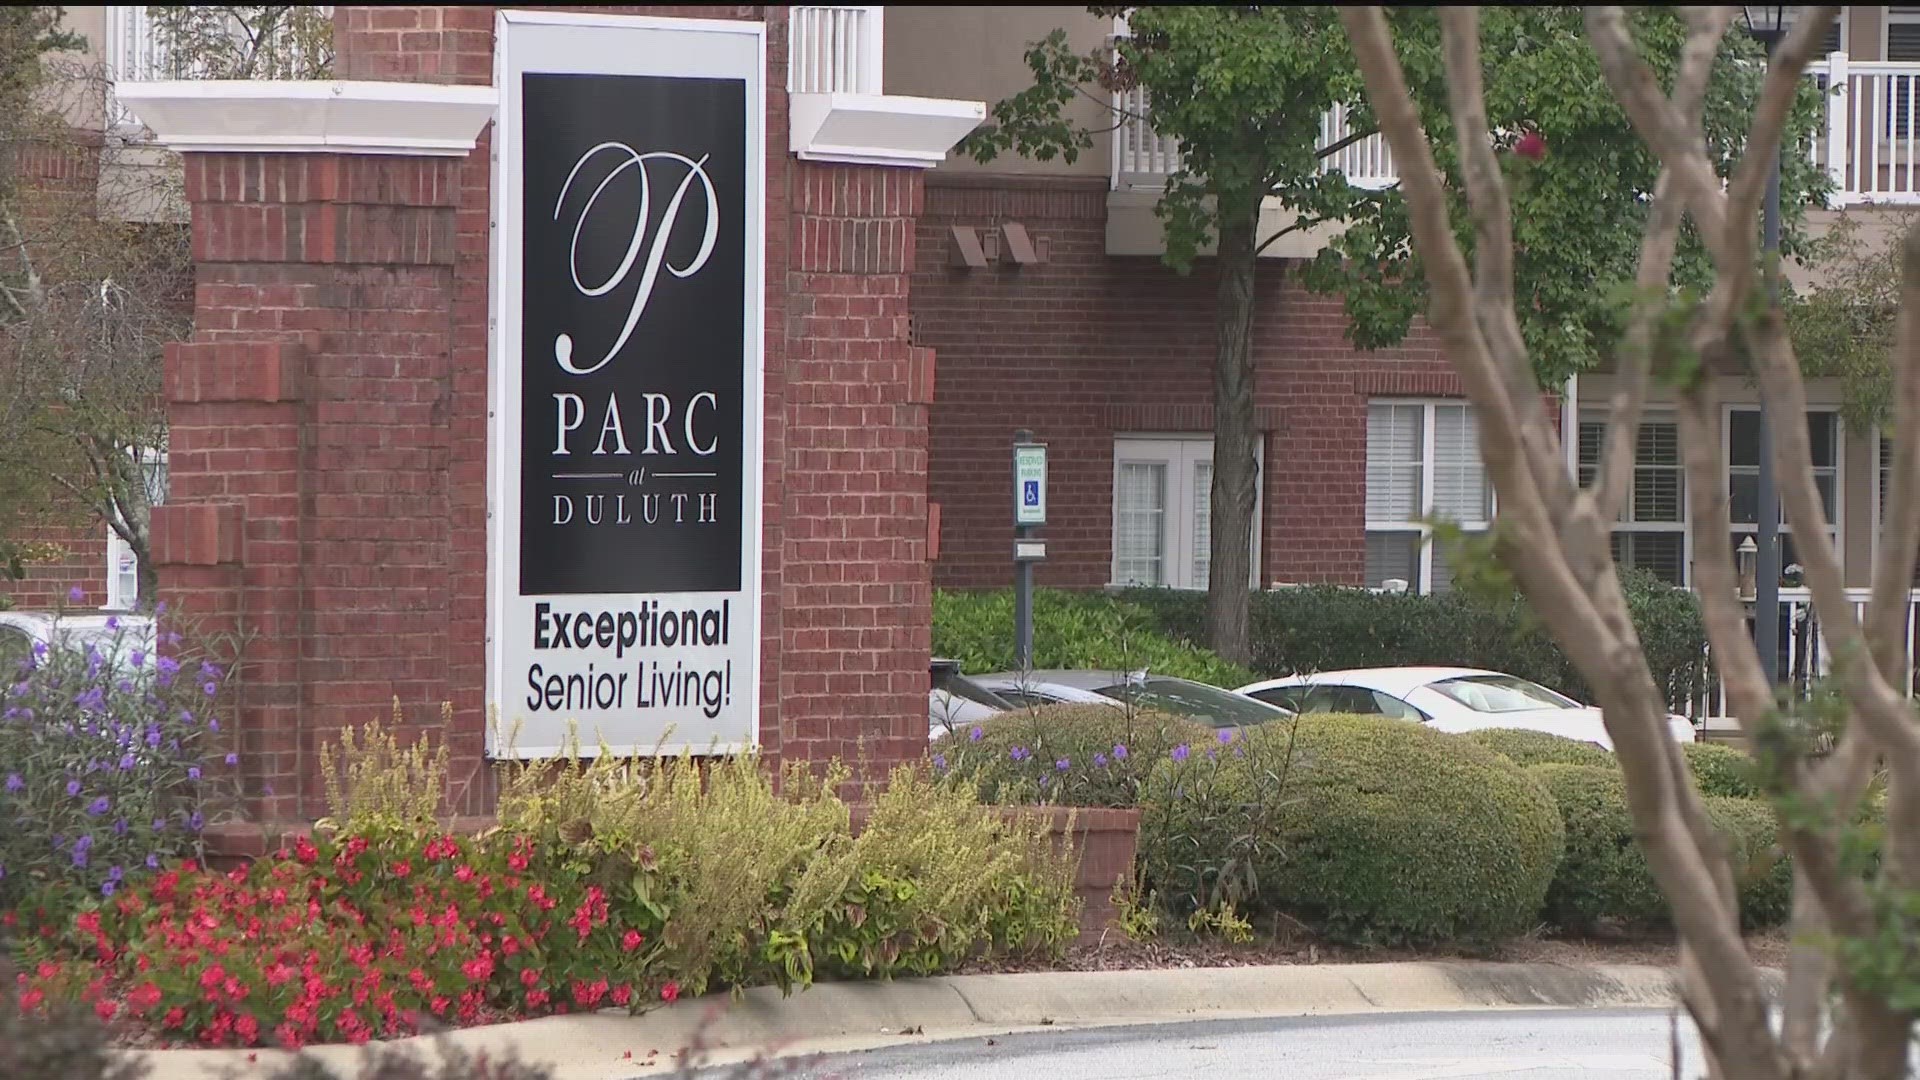 After a senior living facility in Duluth received a poor score on its food inspection report, it's making some changes.